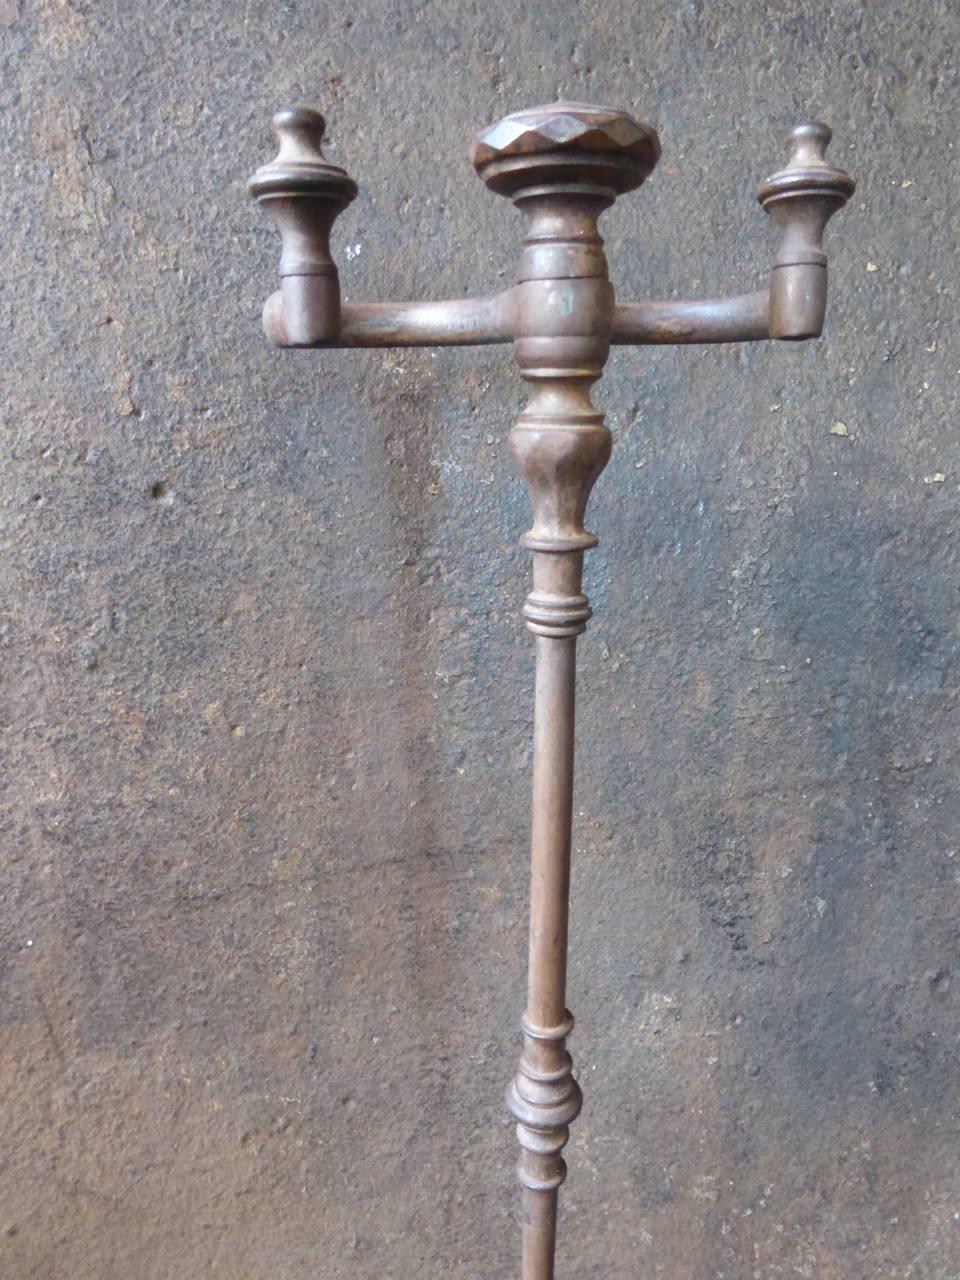 19th century French stand for fireplace tools made of wrought iron and brass.